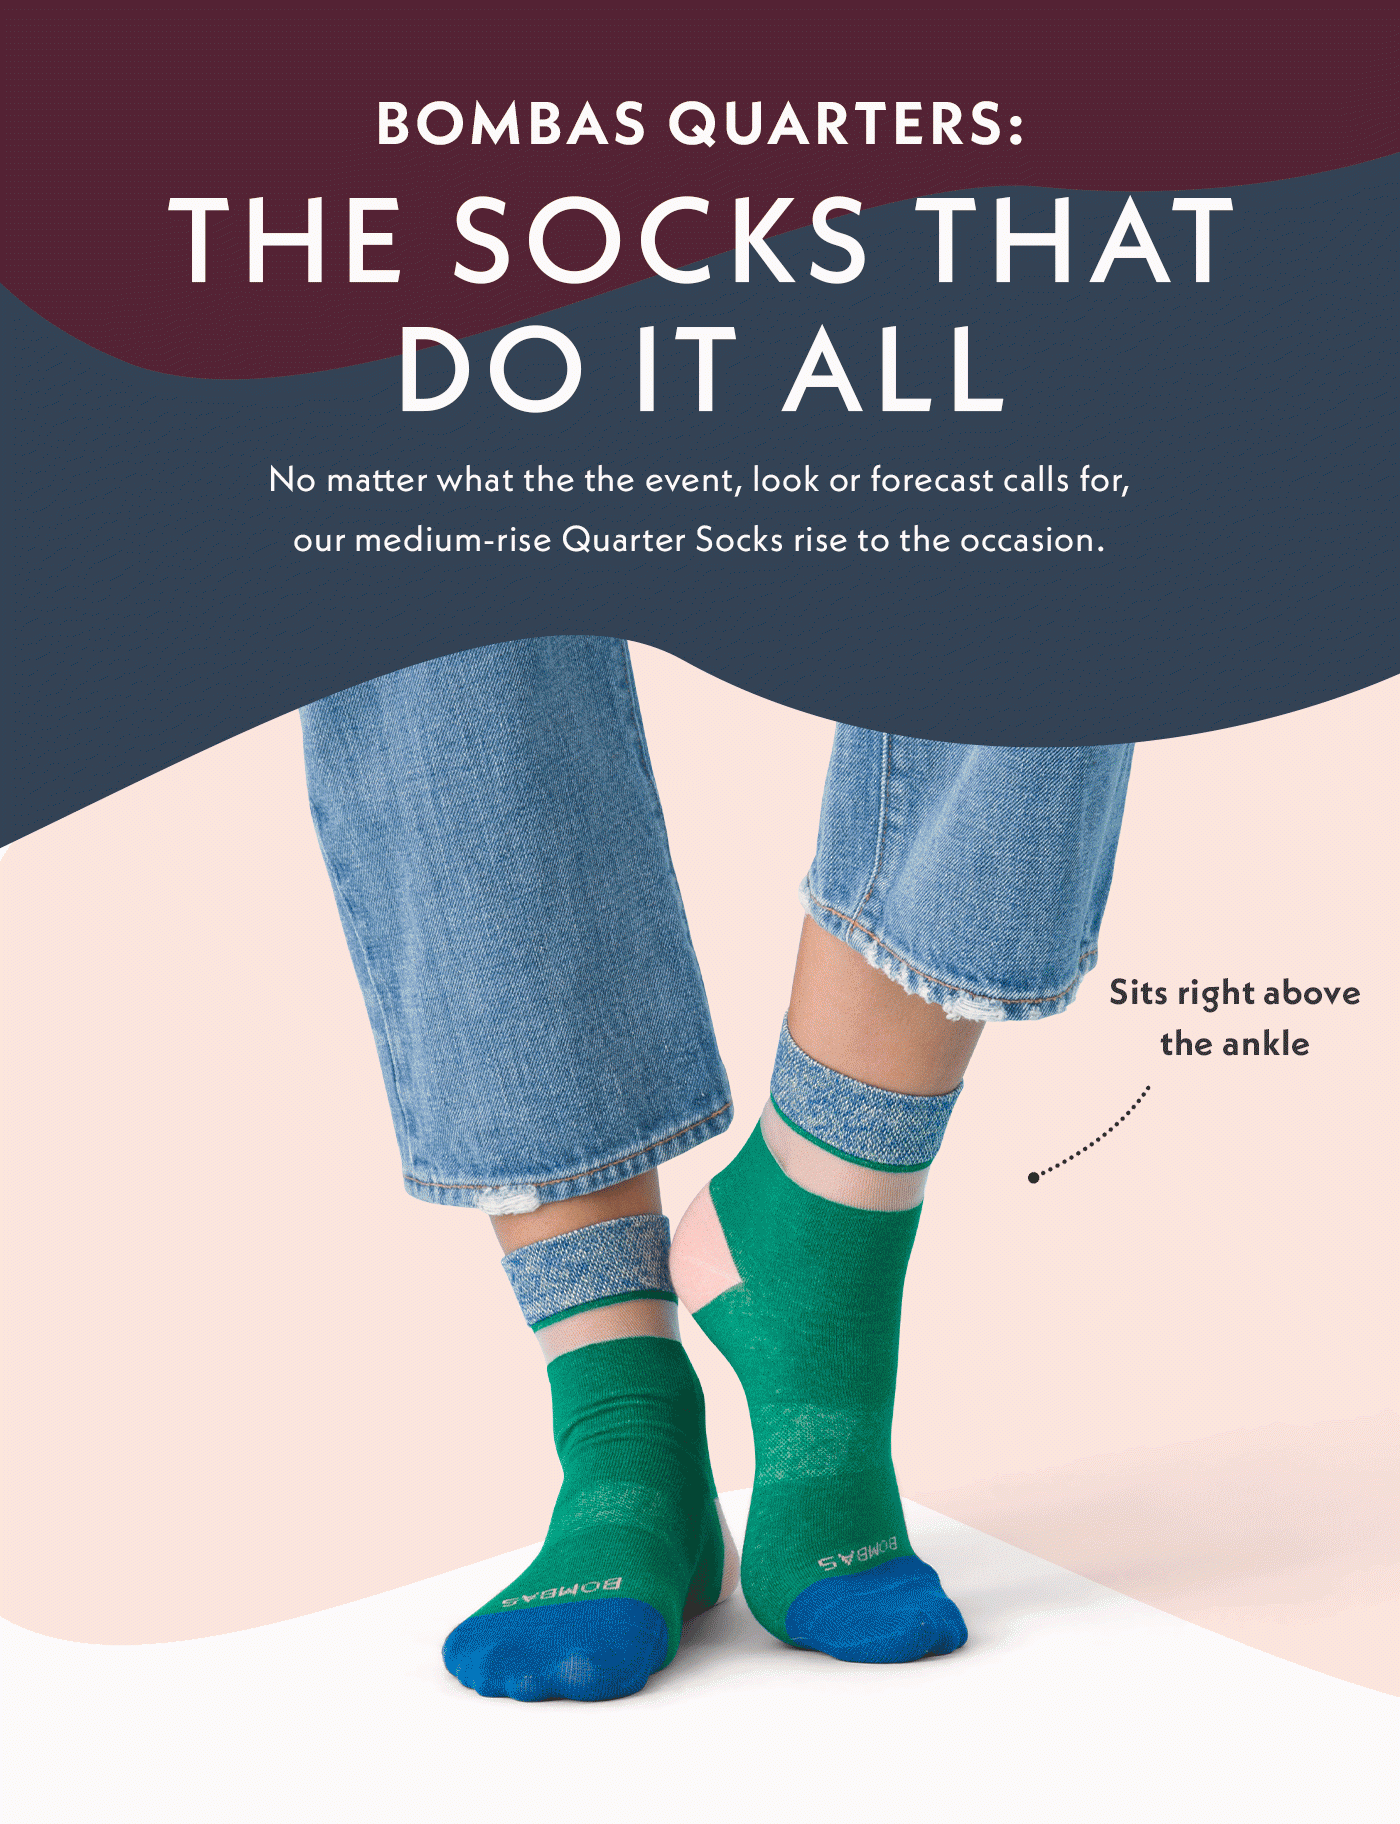 Bombas Quarters: The socks that do it all. No matter what the event, look or forecast calls for, our medium-rise Quarter Socks rise to the occasion.